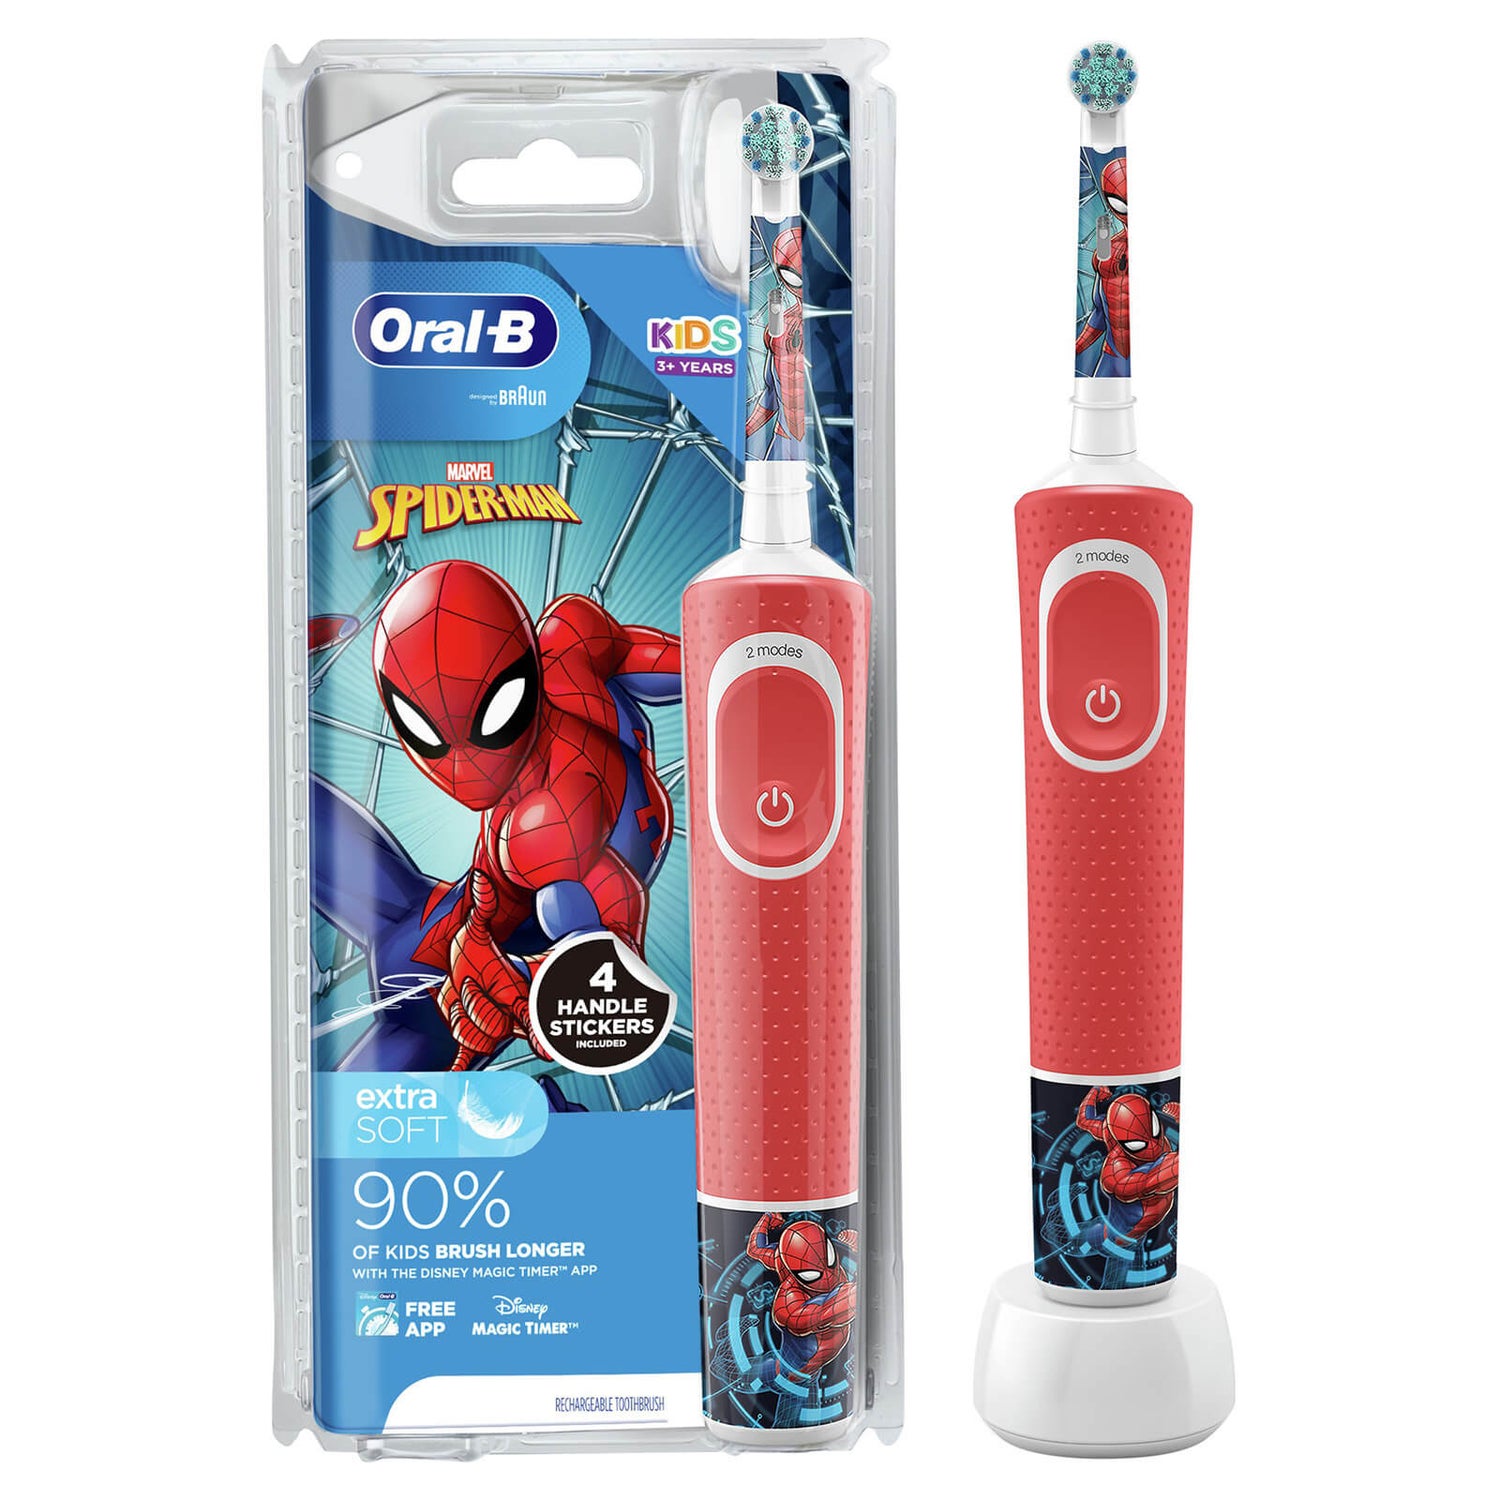 Oral-B Kids Spiderman Electric Toothbrush for Ages 3+